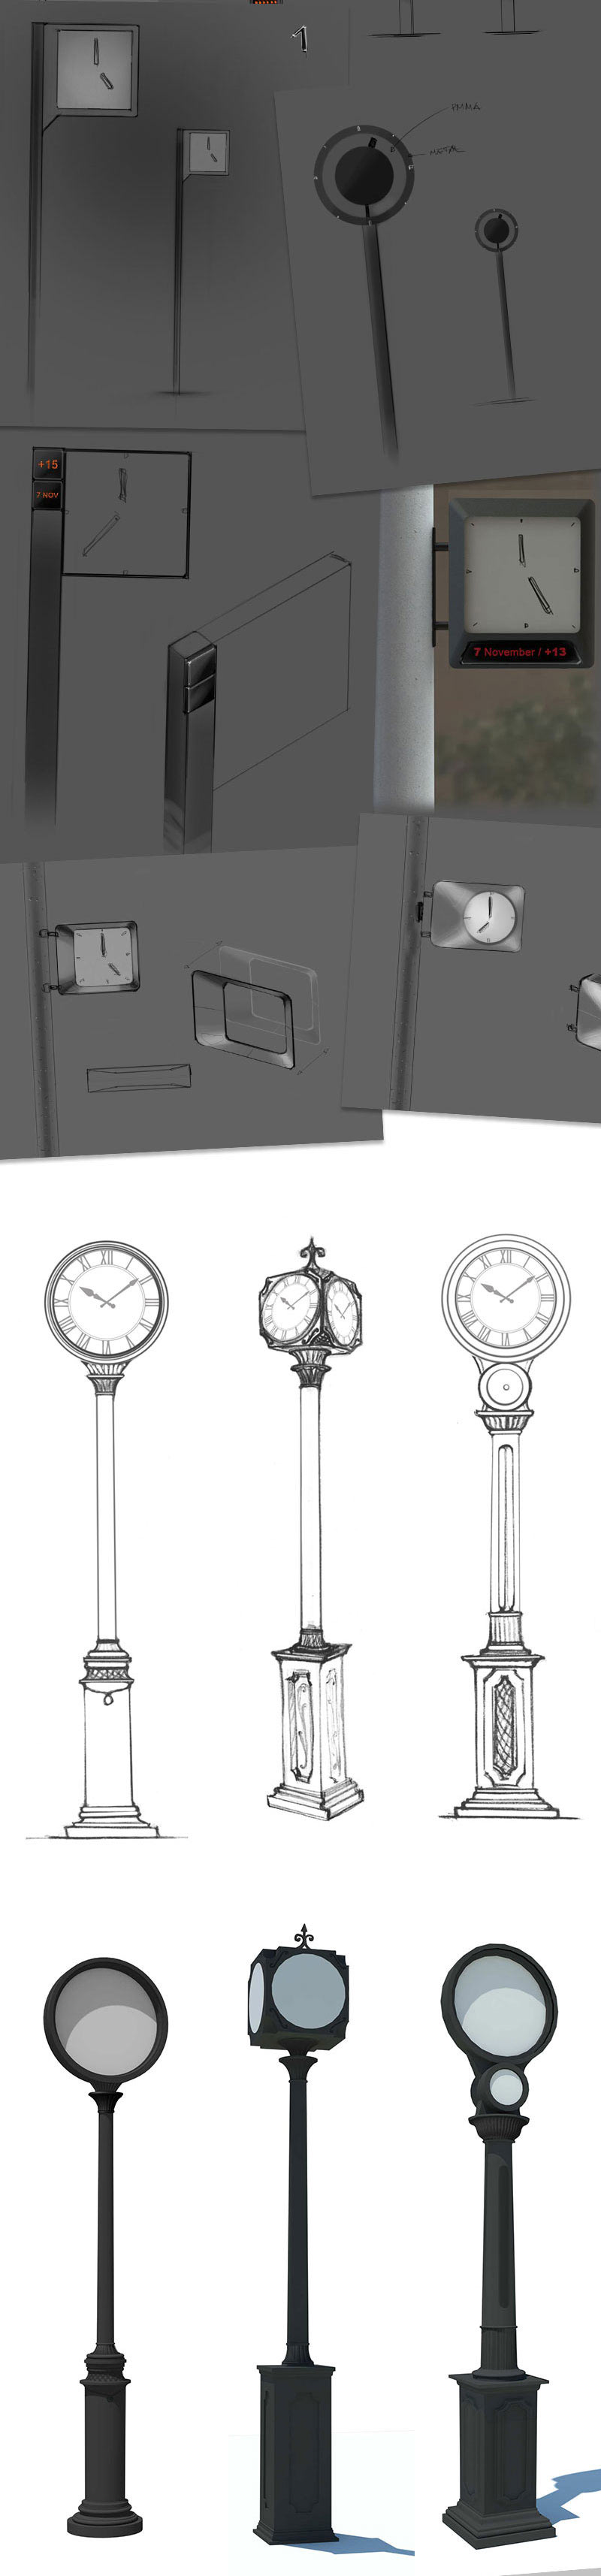 moscow clock process 07